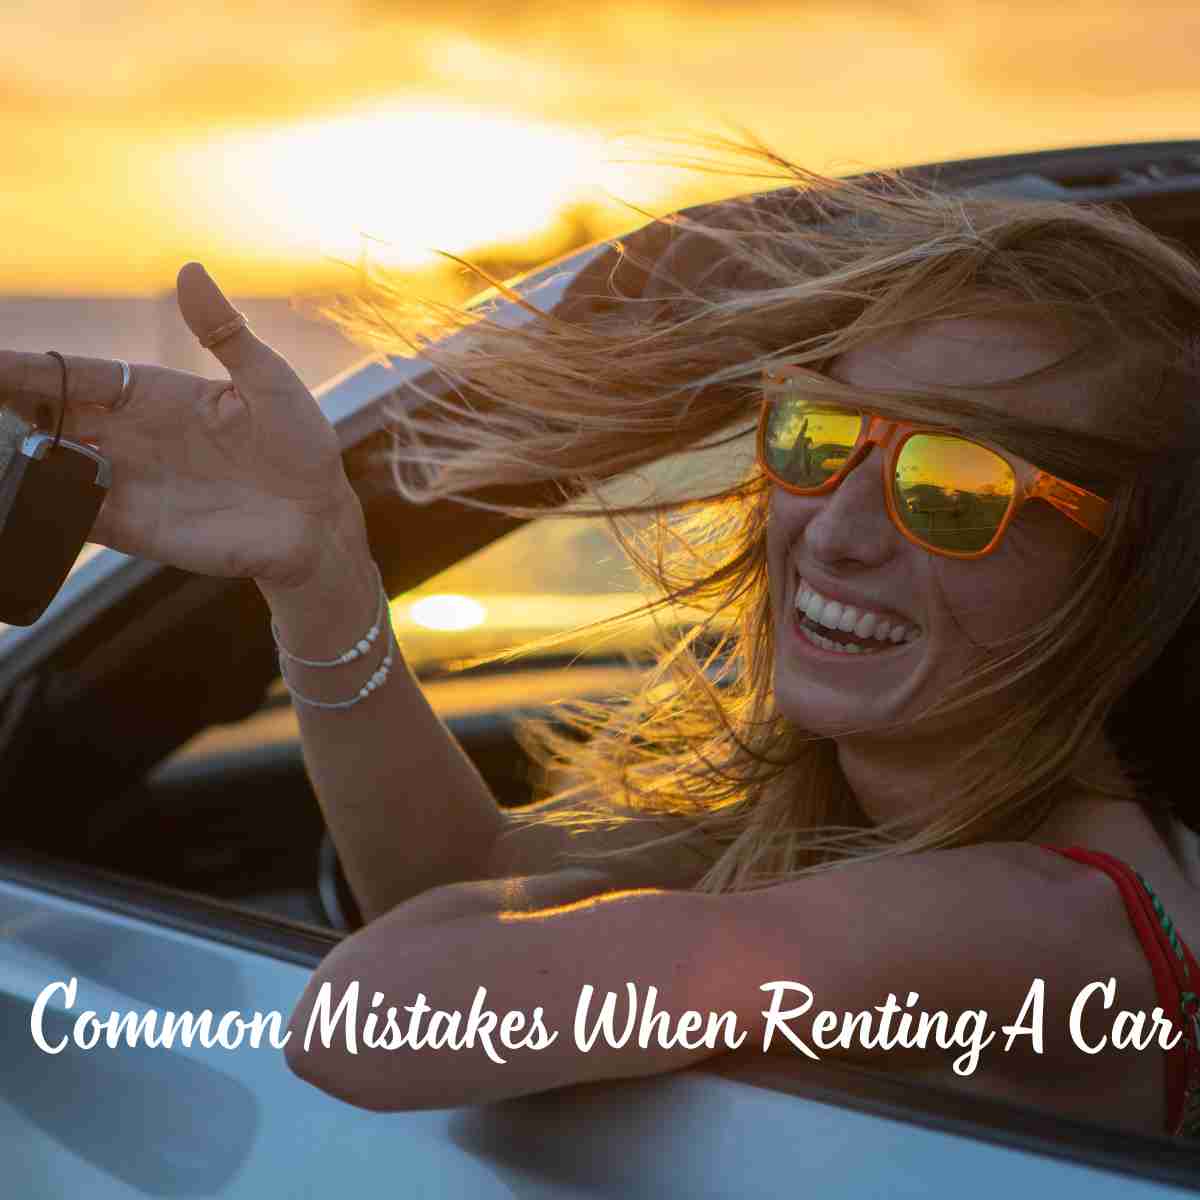 Common Mistakes When Renting A Car